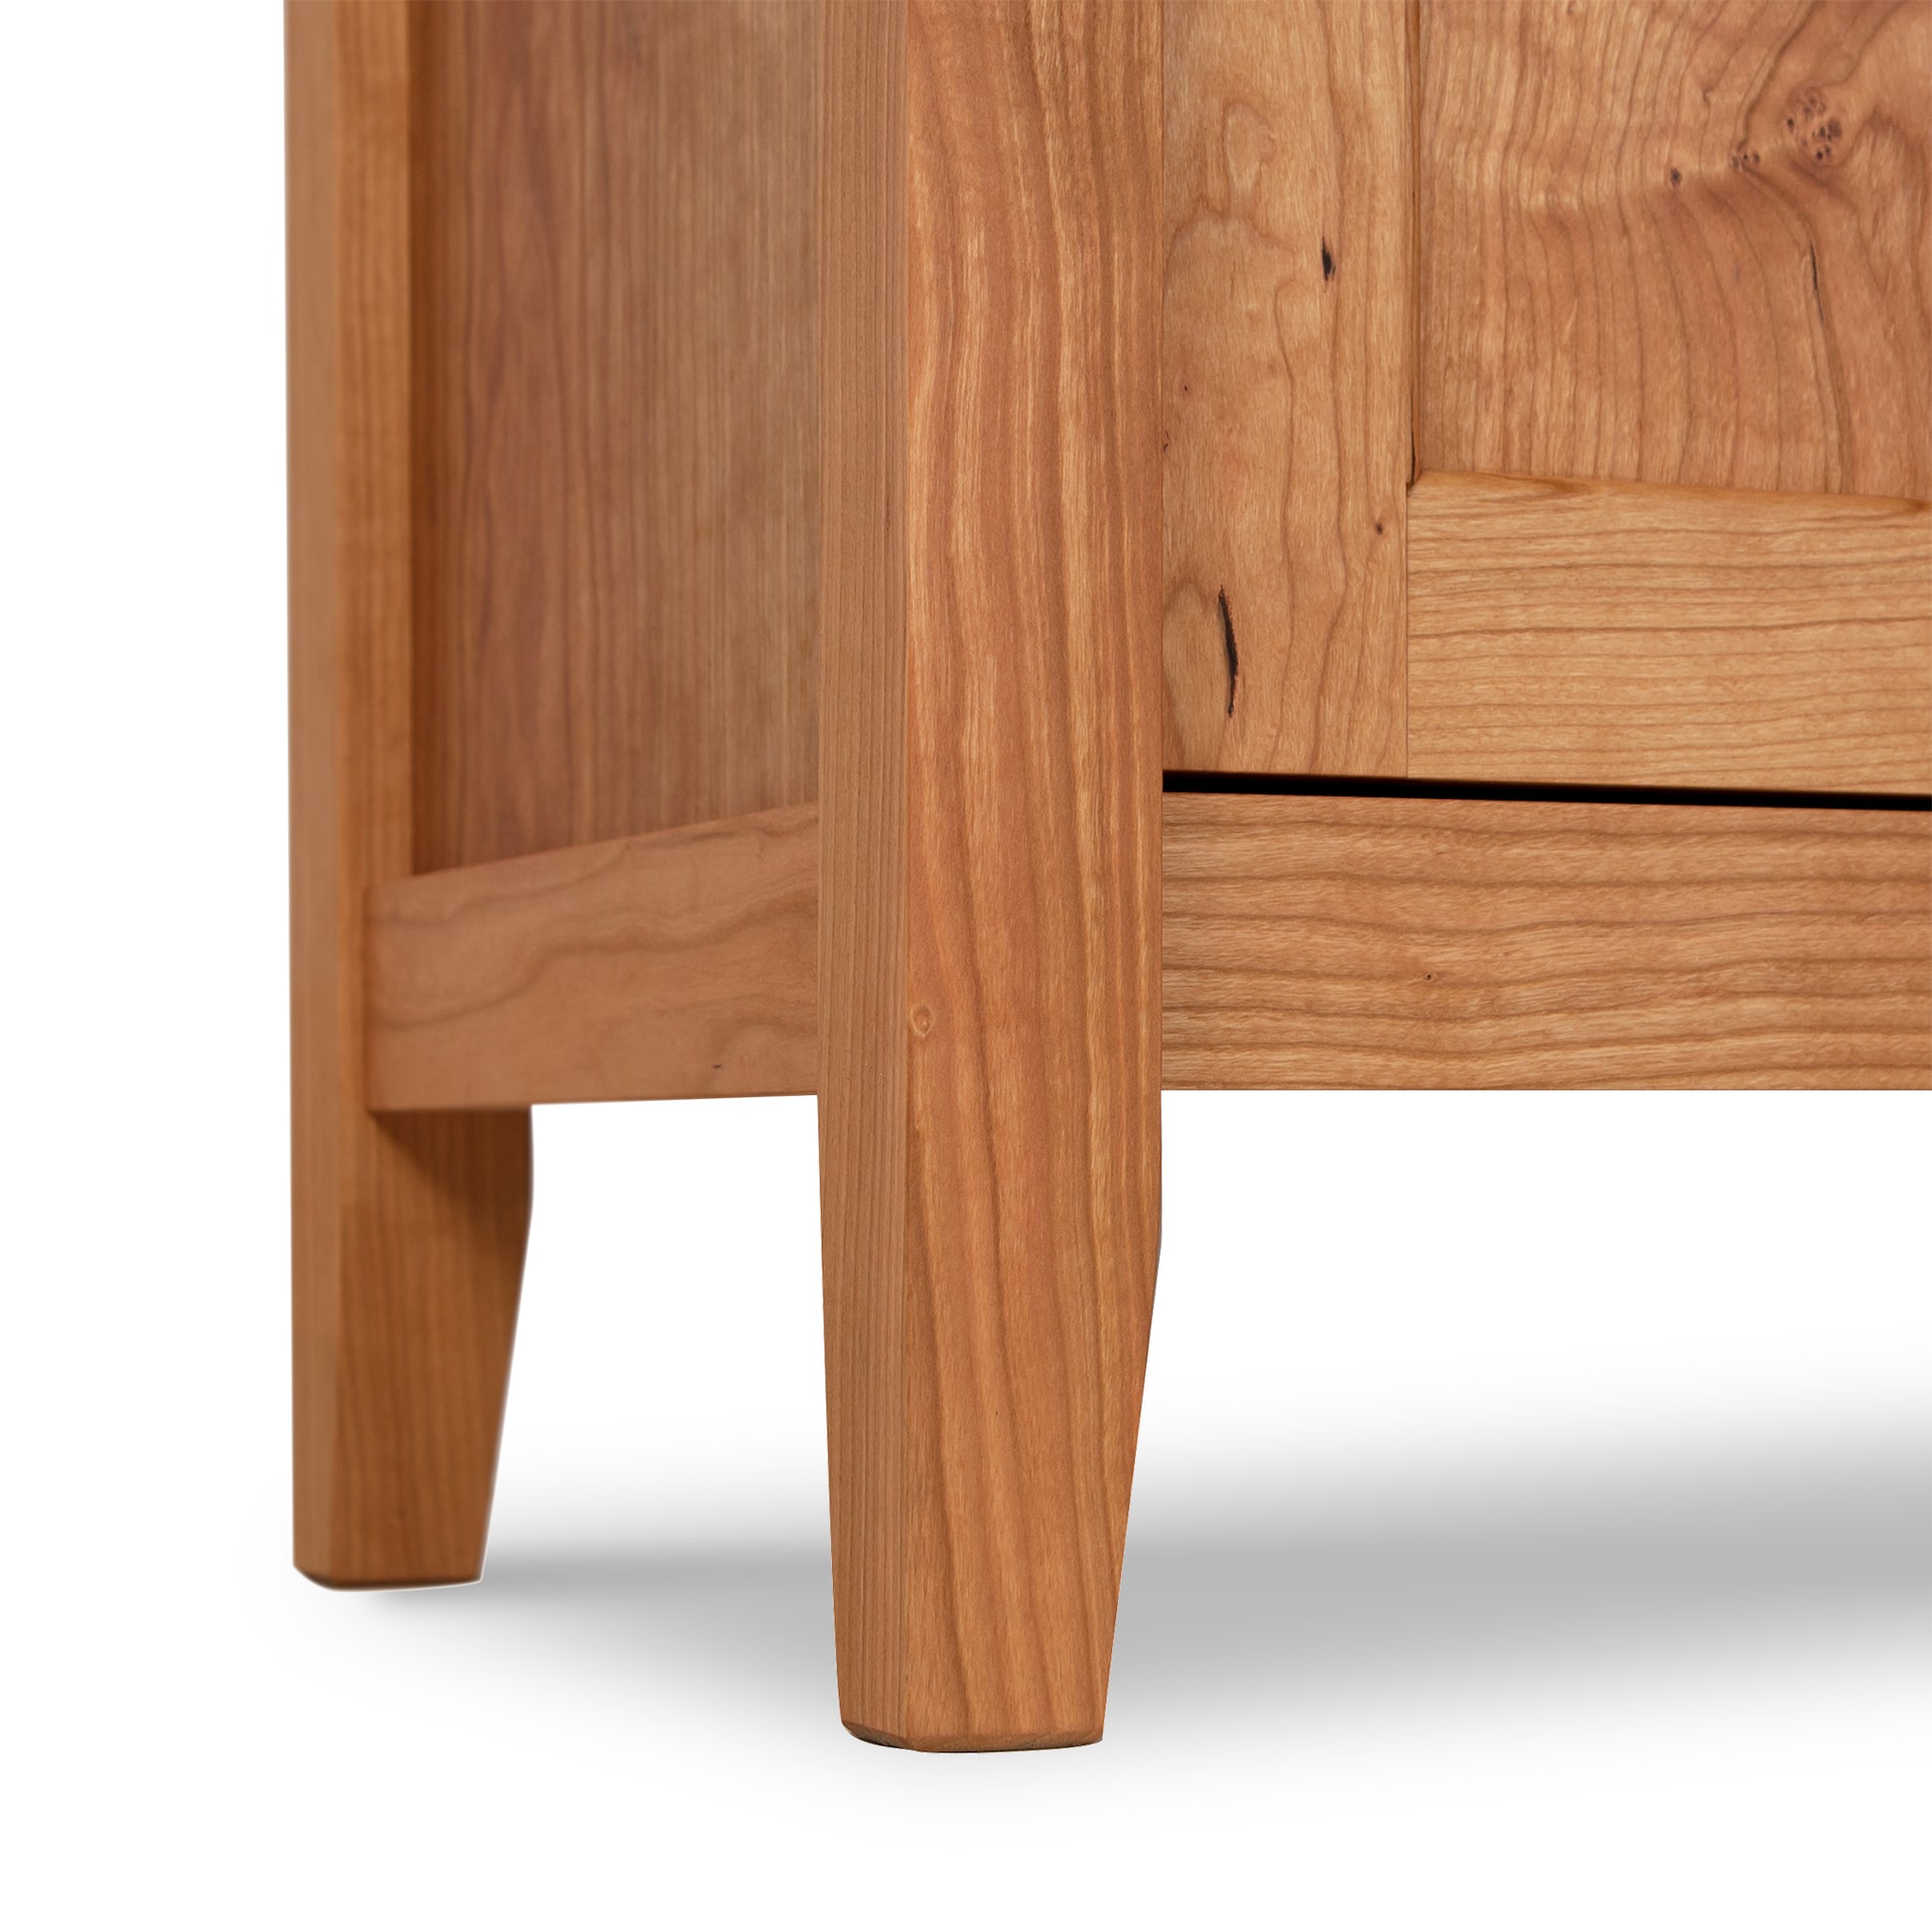 Close-up of a Maple Corner Woodworks Andover Modern 1-Drawer Nightstand with Door detail, crafted by Vermont woodworkers, displaying the joinery and natural wood grain, on a white background.